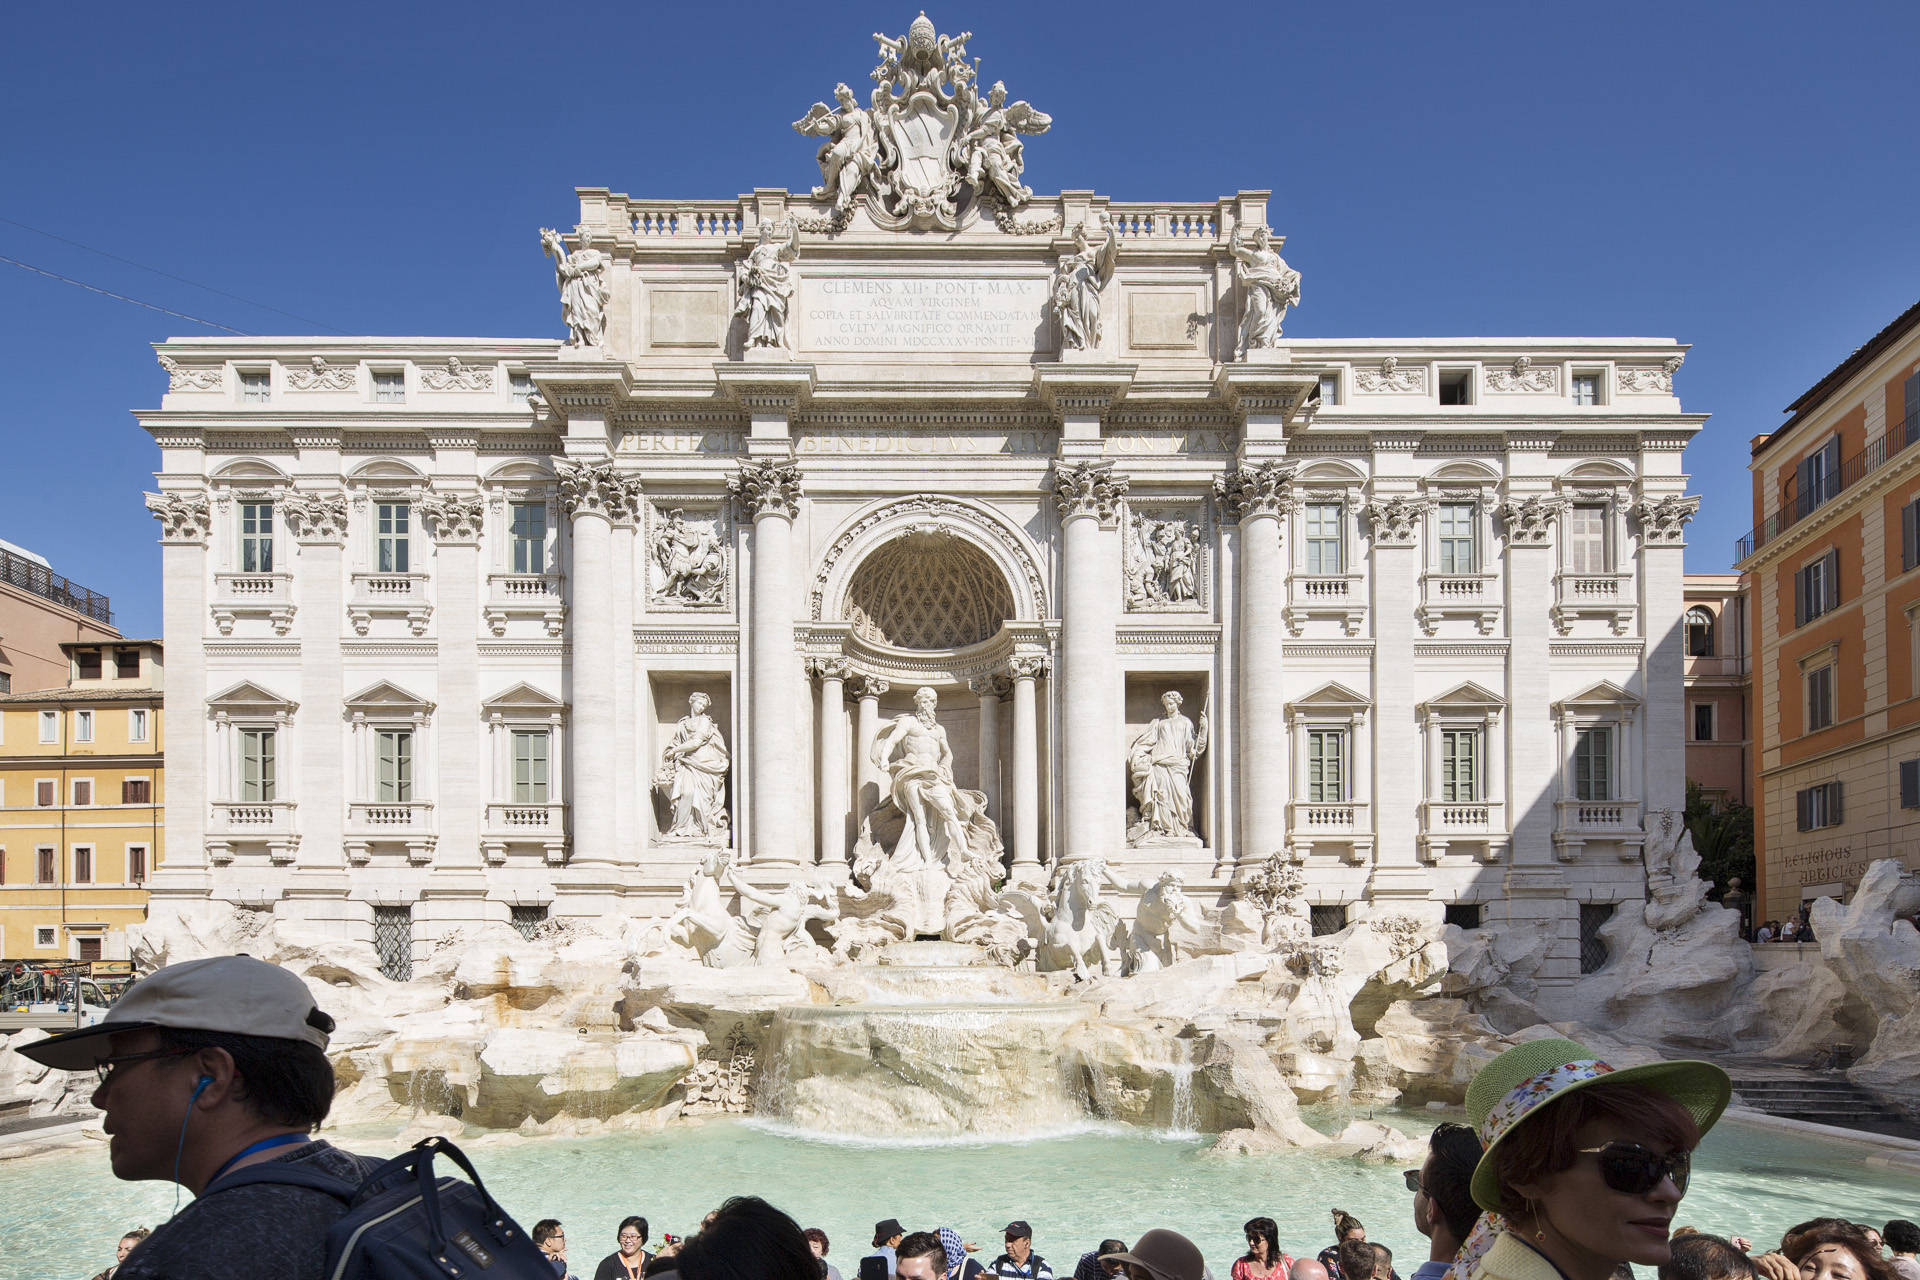 _nf - Rome as you will see it - Fontana Di Trevi